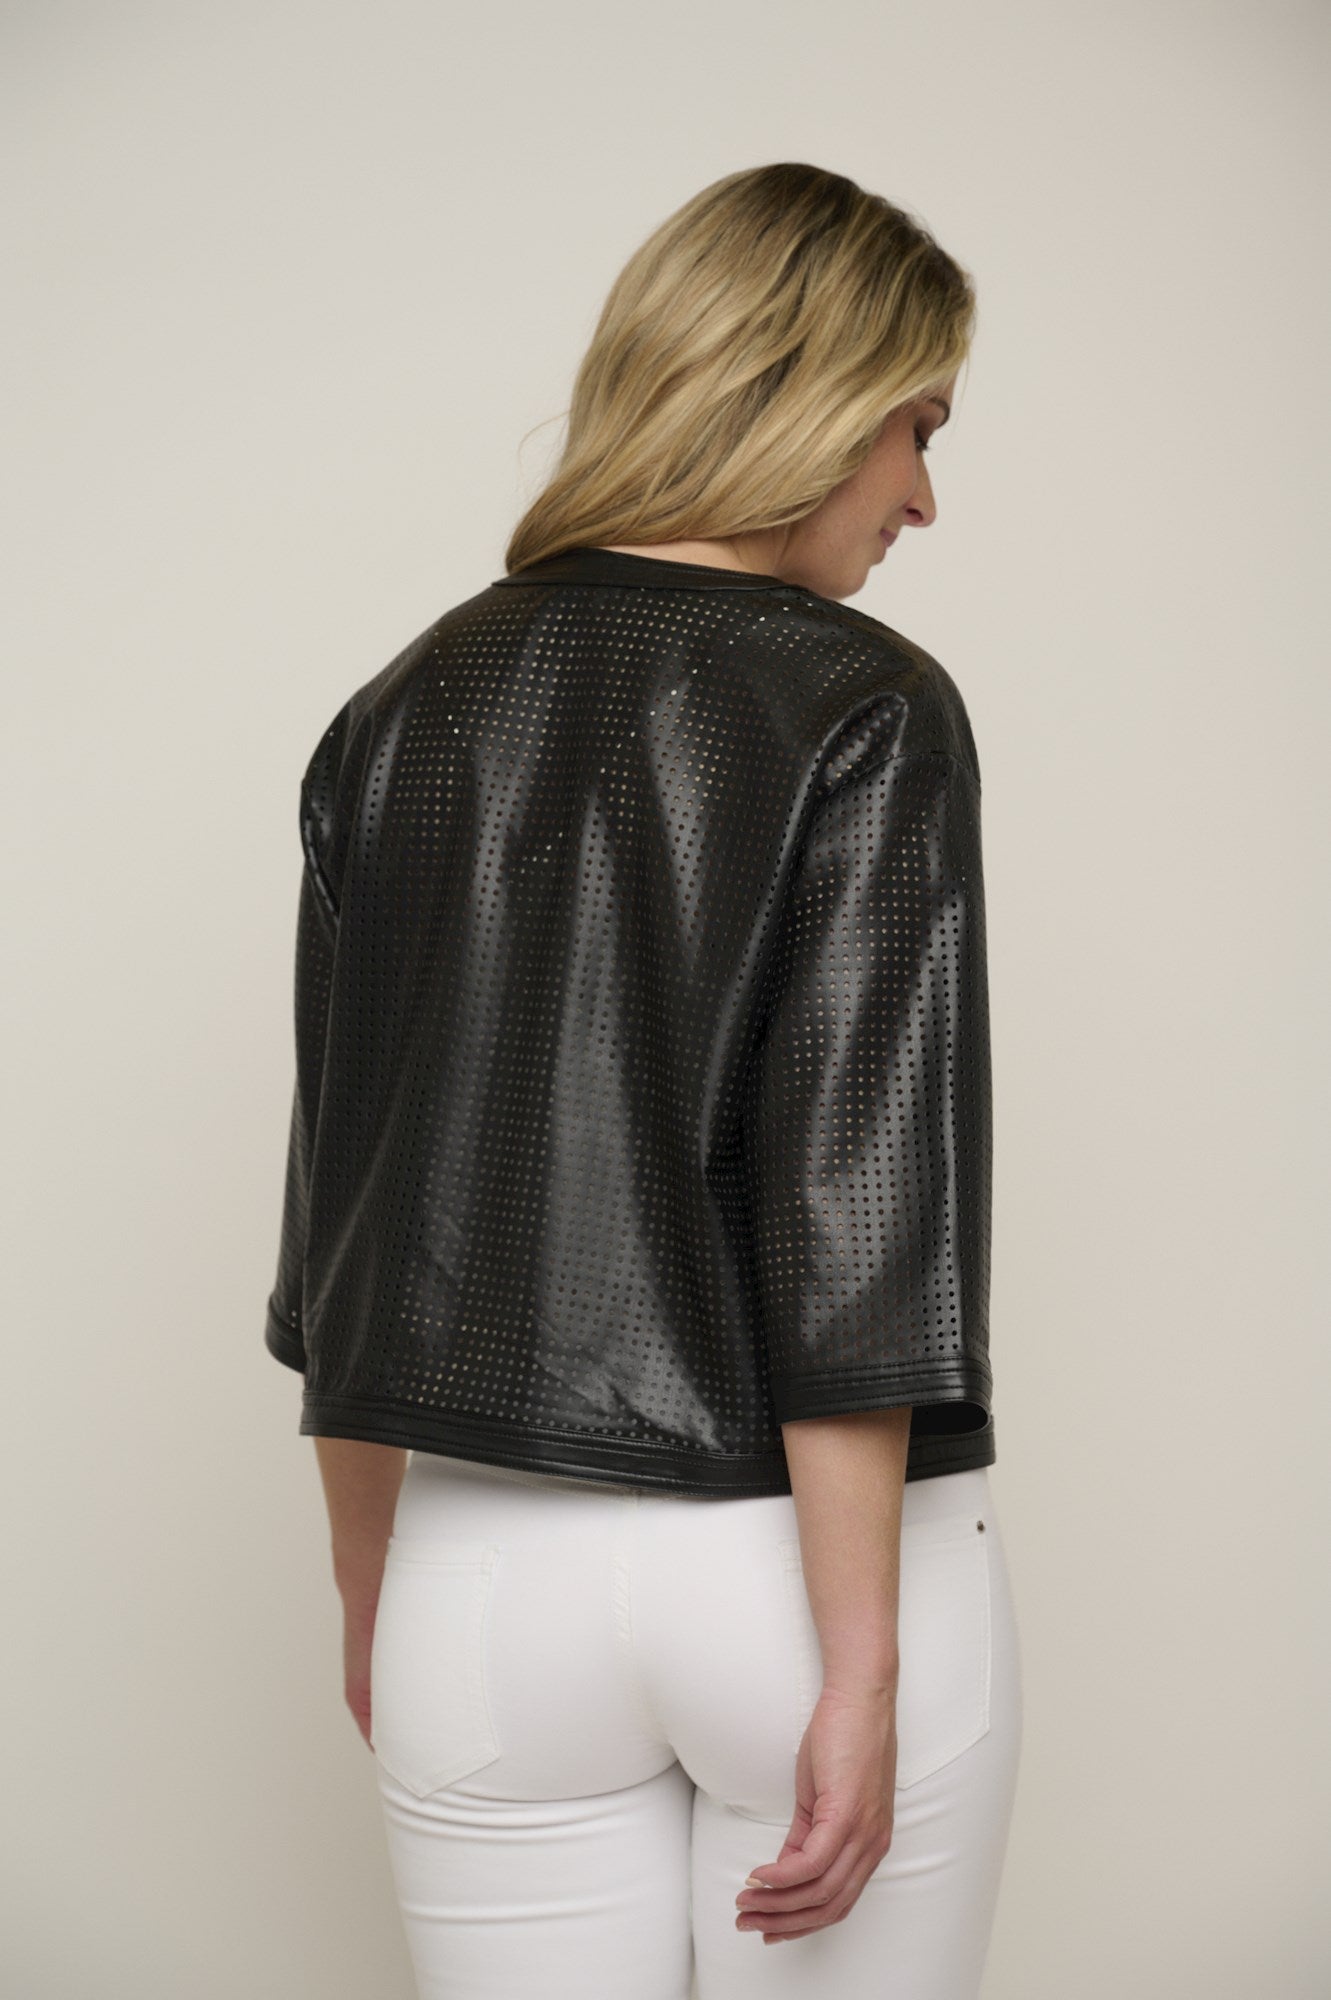 Rino & Pelle Babette faux leather punched jacket